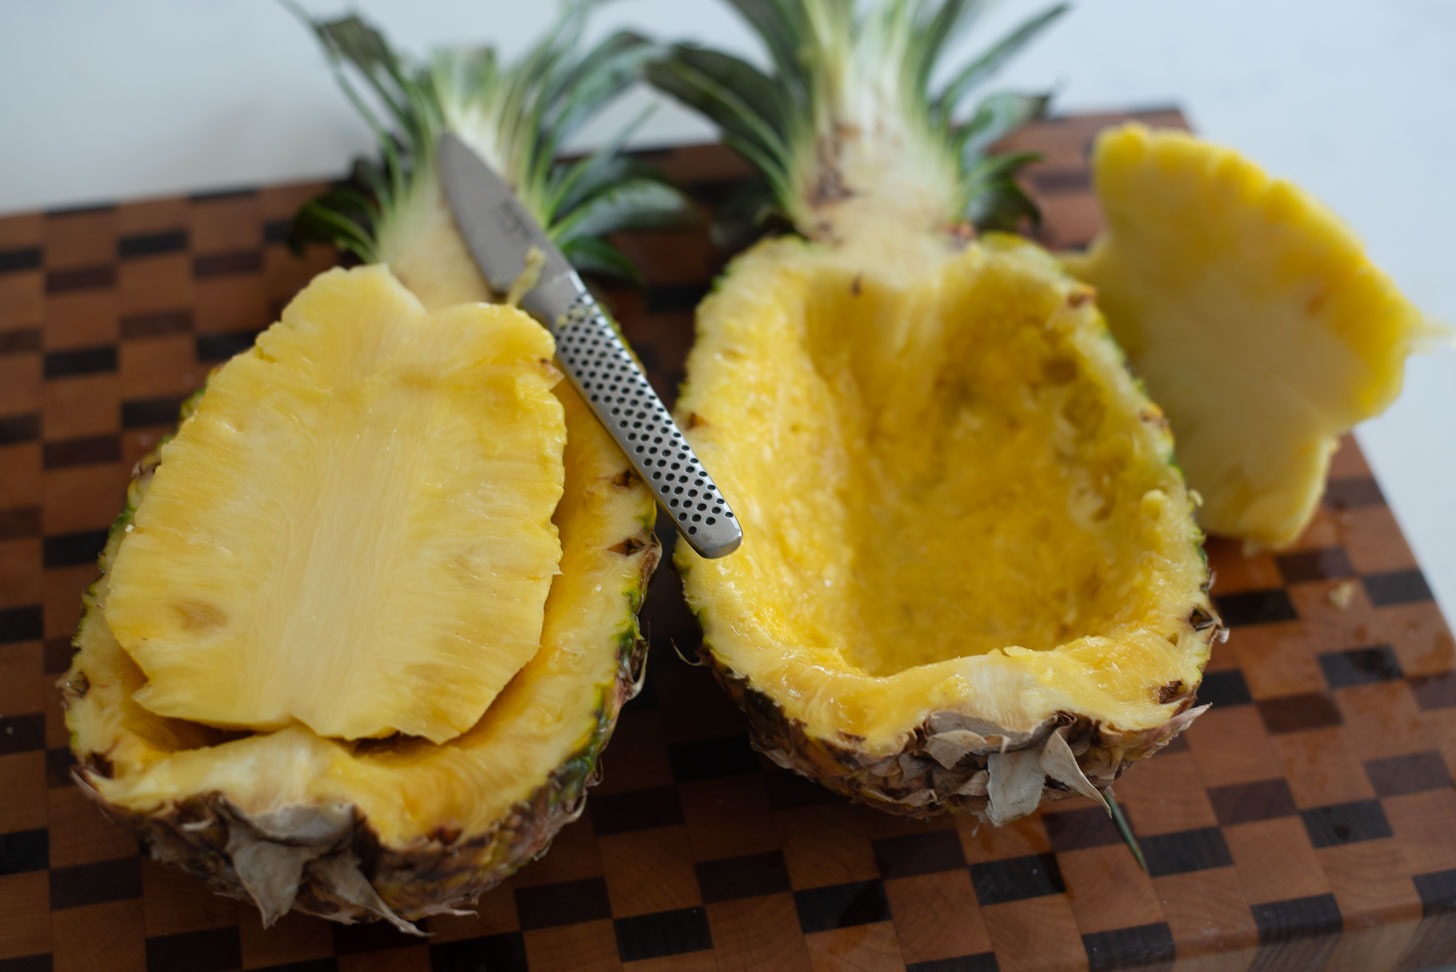 A whole pineapple is cut in half and the flesh in the center is carved.